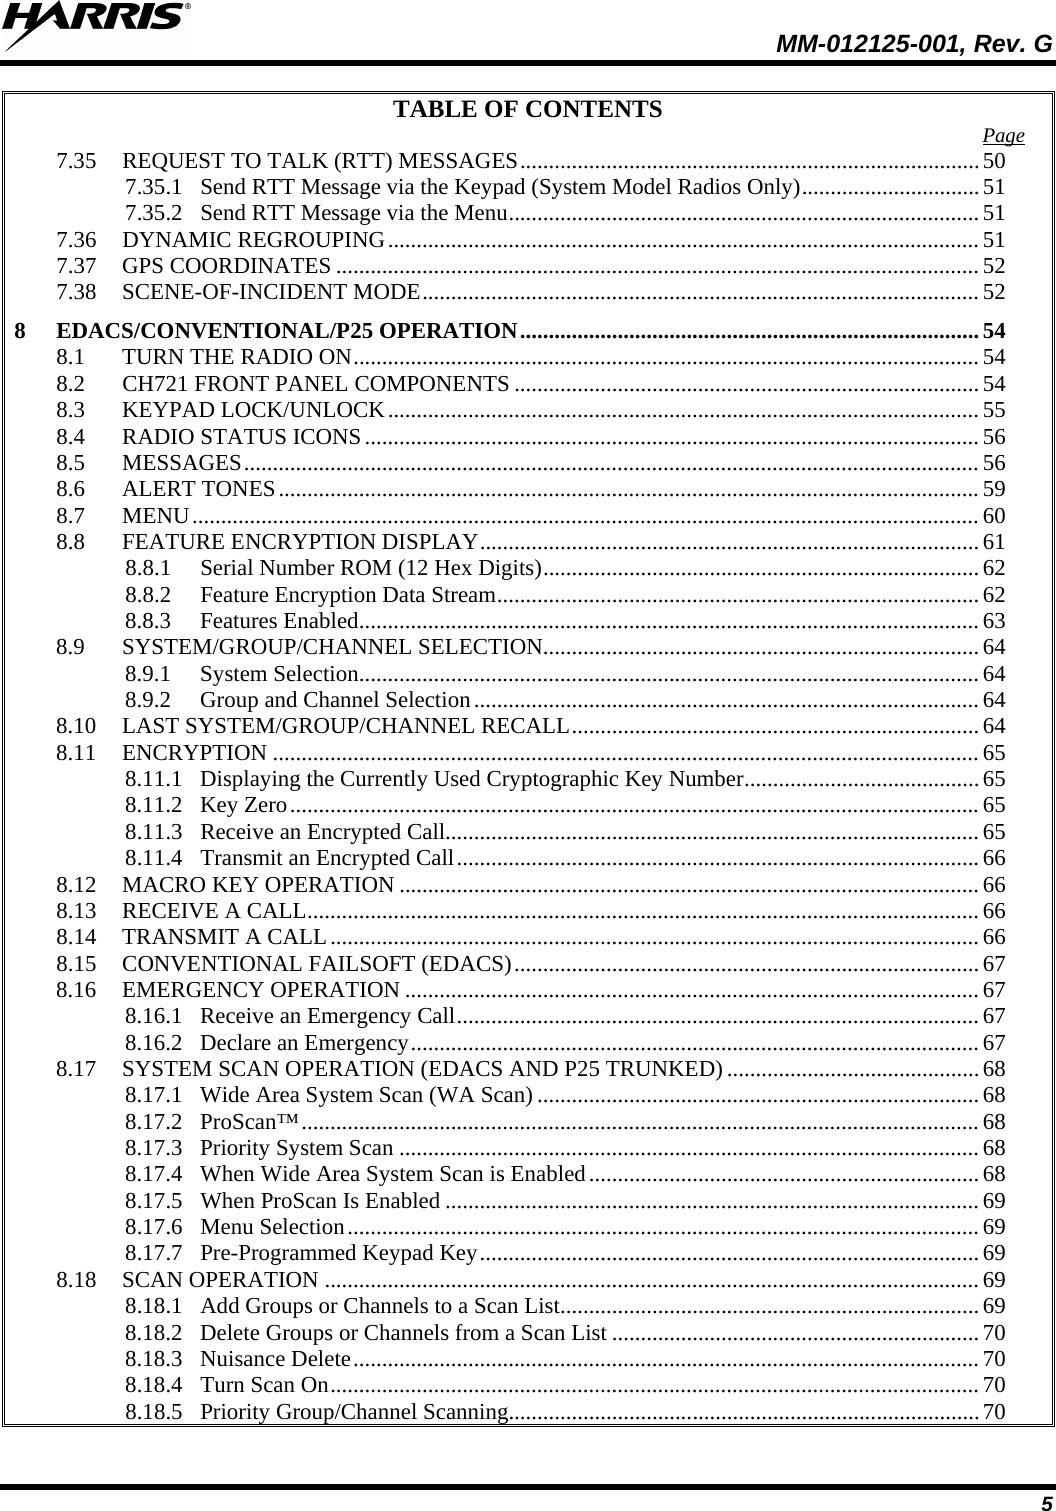  MM-012125-001, Rev. G 5 TABLE OF CONTENTS 7.35 REQUEST TO TALK (RTT) MESSAGES ................................................................................ 50Page  7.35.1 Send RTT Message via the Keypad (System Model Radios Only) ............................... 51 7.35.2 Send RTT Message via the Menu .................................................................................. 51 7.36 DYNAMIC REGROUPING ....................................................................................................... 51 7.37 GPS COORDINATES ................................................................................................................ 52 7.38 SCENE-OF-INCIDENT MODE ................................................................................................. 52 8 EDACS/CONVENTIONAL/P25 OPERATION ................................................................................ 54 8.1 TURN THE RADIO ON ............................................................................................................. 54 8.2 CH721 FRONT PANEL COMPONENTS ................................................................................. 54 8.3 KEYPAD LOCK/UNLOCK ....................................................................................................... 55 8.4 RADIO STATUS ICONS ........................................................................................................... 56 8.5 MESSAGES ................................................................................................................................ 56 8.6 ALERT TONES .......................................................................................................................... 59 8.7 MENU ......................................................................................................................................... 60 8.8 FEATURE ENCRYPTION DISPLAY ....................................................................................... 61 8.8.1 Serial Number ROM (12 Hex Digits) ............................................................................ 62 8.8.2 Feature Encryption Data Stream .................................................................................... 62 8.8.3 Features Enabled ............................................................................................................ 63 8.9 SYSTEM/GROUP/CHANNEL SELECTION............................................................................ 64 8.9.1 System Selection ............................................................................................................ 64 8.9.2 Group and Channel Selection ........................................................................................ 64 8.10 LAST SYSTEM/GROUP/CHANNEL RECALL ....................................................................... 64 8.11 ENCRYPTION ........................................................................................................................... 65 8.11.1 Displaying the Currently Used Cryptographic Key Number ......................................... 65 8.11.2 Key Zero ........................................................................................................................ 65 8.11.3 Receive an Encrypted Call............................................................................................. 65 8.11.4 Transmit an Encrypted Call ........................................................................................... 66 8.12 MACRO KEY OPERATION ..................................................................................................... 66 8.13 RECEIVE A CALL ..................................................................................................................... 66 8.14 TRANSMIT A CALL ................................................................................................................. 66 8.15 CONVENTIONAL FAILSOFT (EDACS) ................................................................................. 67 8.16 EMERGENCY OPERATION .................................................................................................... 67 8.16.1 Receive an Emergency Call ........................................................................................... 67 8.16.2 Declare an Emergency ................................................................................................... 67 8.17 SYSTEM SCAN OPERATION (EDACS AND P25 TRUNKED) ............................................ 68 8.17.1 Wide Area System Scan (WA Scan) ............................................................................. 68 8.17.2 ProScan™ ...................................................................................................................... 68 8.17.3 Priority System Scan ..................................................................................................... 68 8.17.4 When Wide Area System Scan is Enabled .................................................................... 68 8.17.5 When ProScan Is Enabled ............................................................................................. 69 8.17.6 Menu Selection .............................................................................................................. 69 8.17.7 Pre-Programmed Keypad Key ....................................................................................... 69 8.18 SCAN OPERATION .................................................................................................................. 69 8.18.1 Add Groups or Channels to a Scan List ......................................................................... 69 8.18.2 Delete Groups or Channels from a Scan List ................................................................ 70 8.18.3 Nuisance Delete ............................................................................................................. 70 8.18.4 Turn Scan On ................................................................................................................. 70 8.18.5 Priority Group/Channel Scanning .................................................................................. 70 